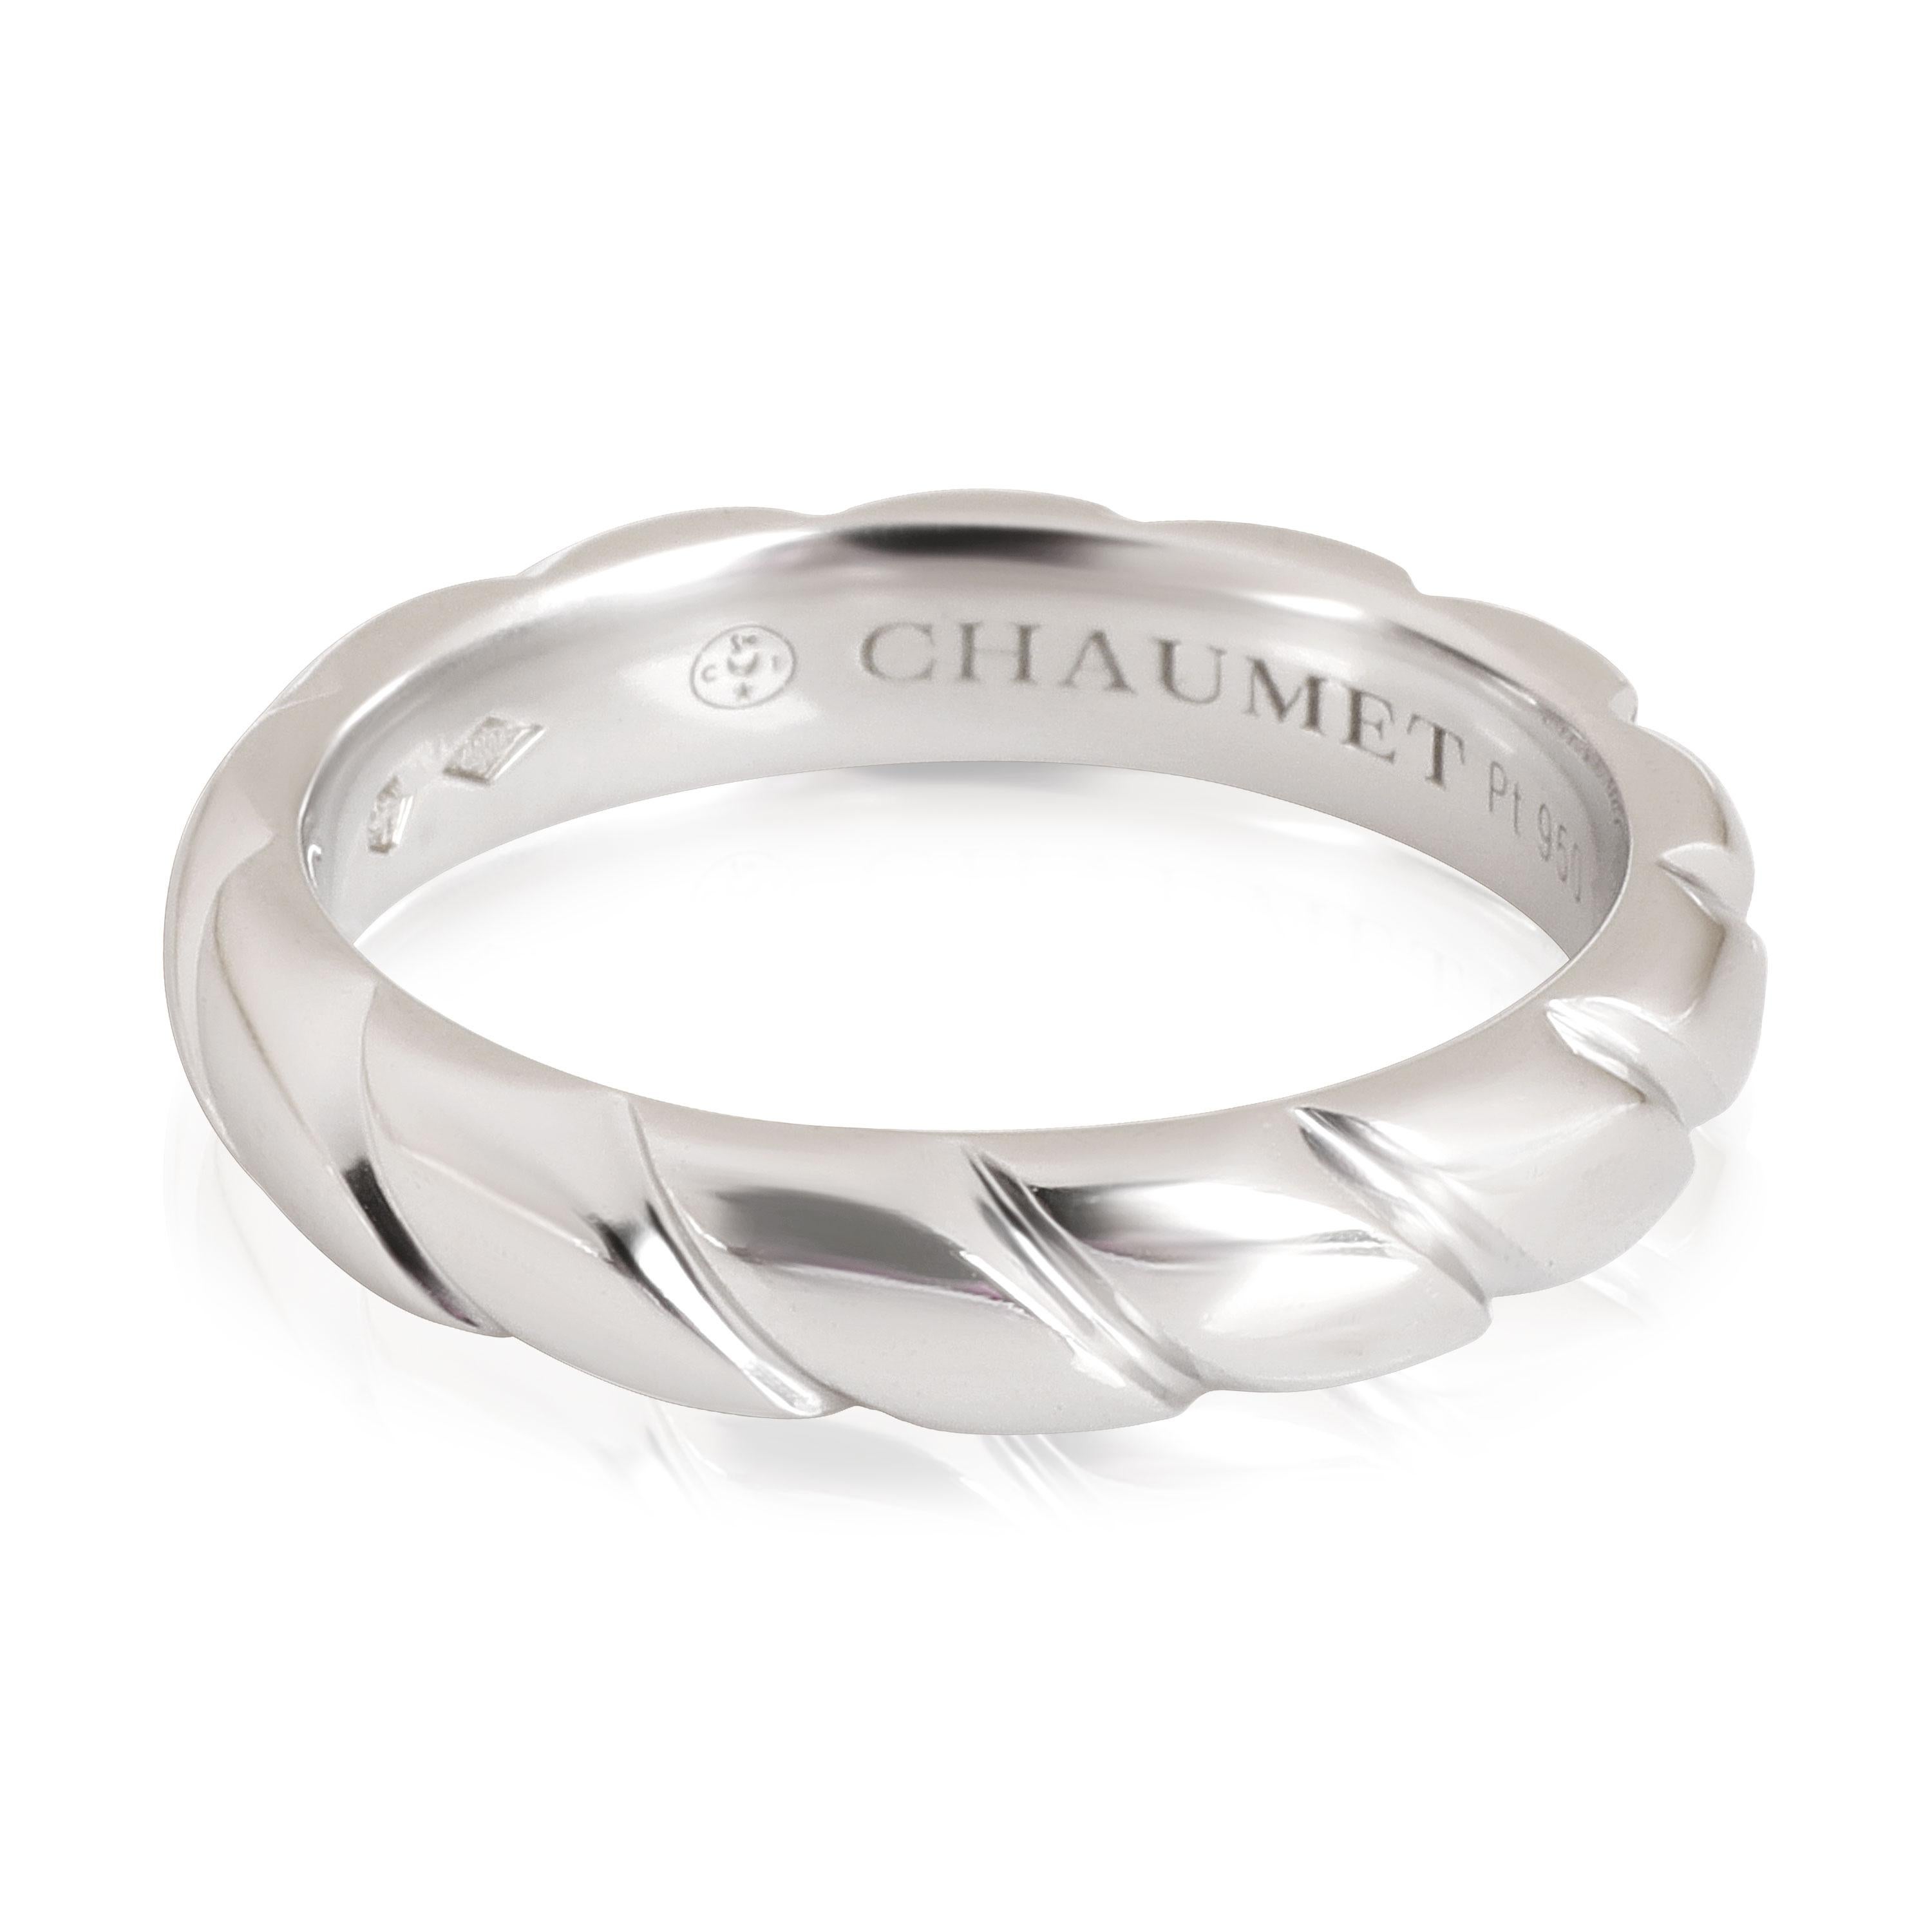 Chaumet Torsade de Chaumet Diamond Band in  Platinum GHI VS2-SI1 0.05 CTW

PRIMARY DETAILS
SKU: 114042
Listing Title: Chaumet Torsade de Chaumet Diamond Band in  Platinum GHI VS2-SI1 0.05 CTW
Condition Description: Retails for 3000 USD. In excellent